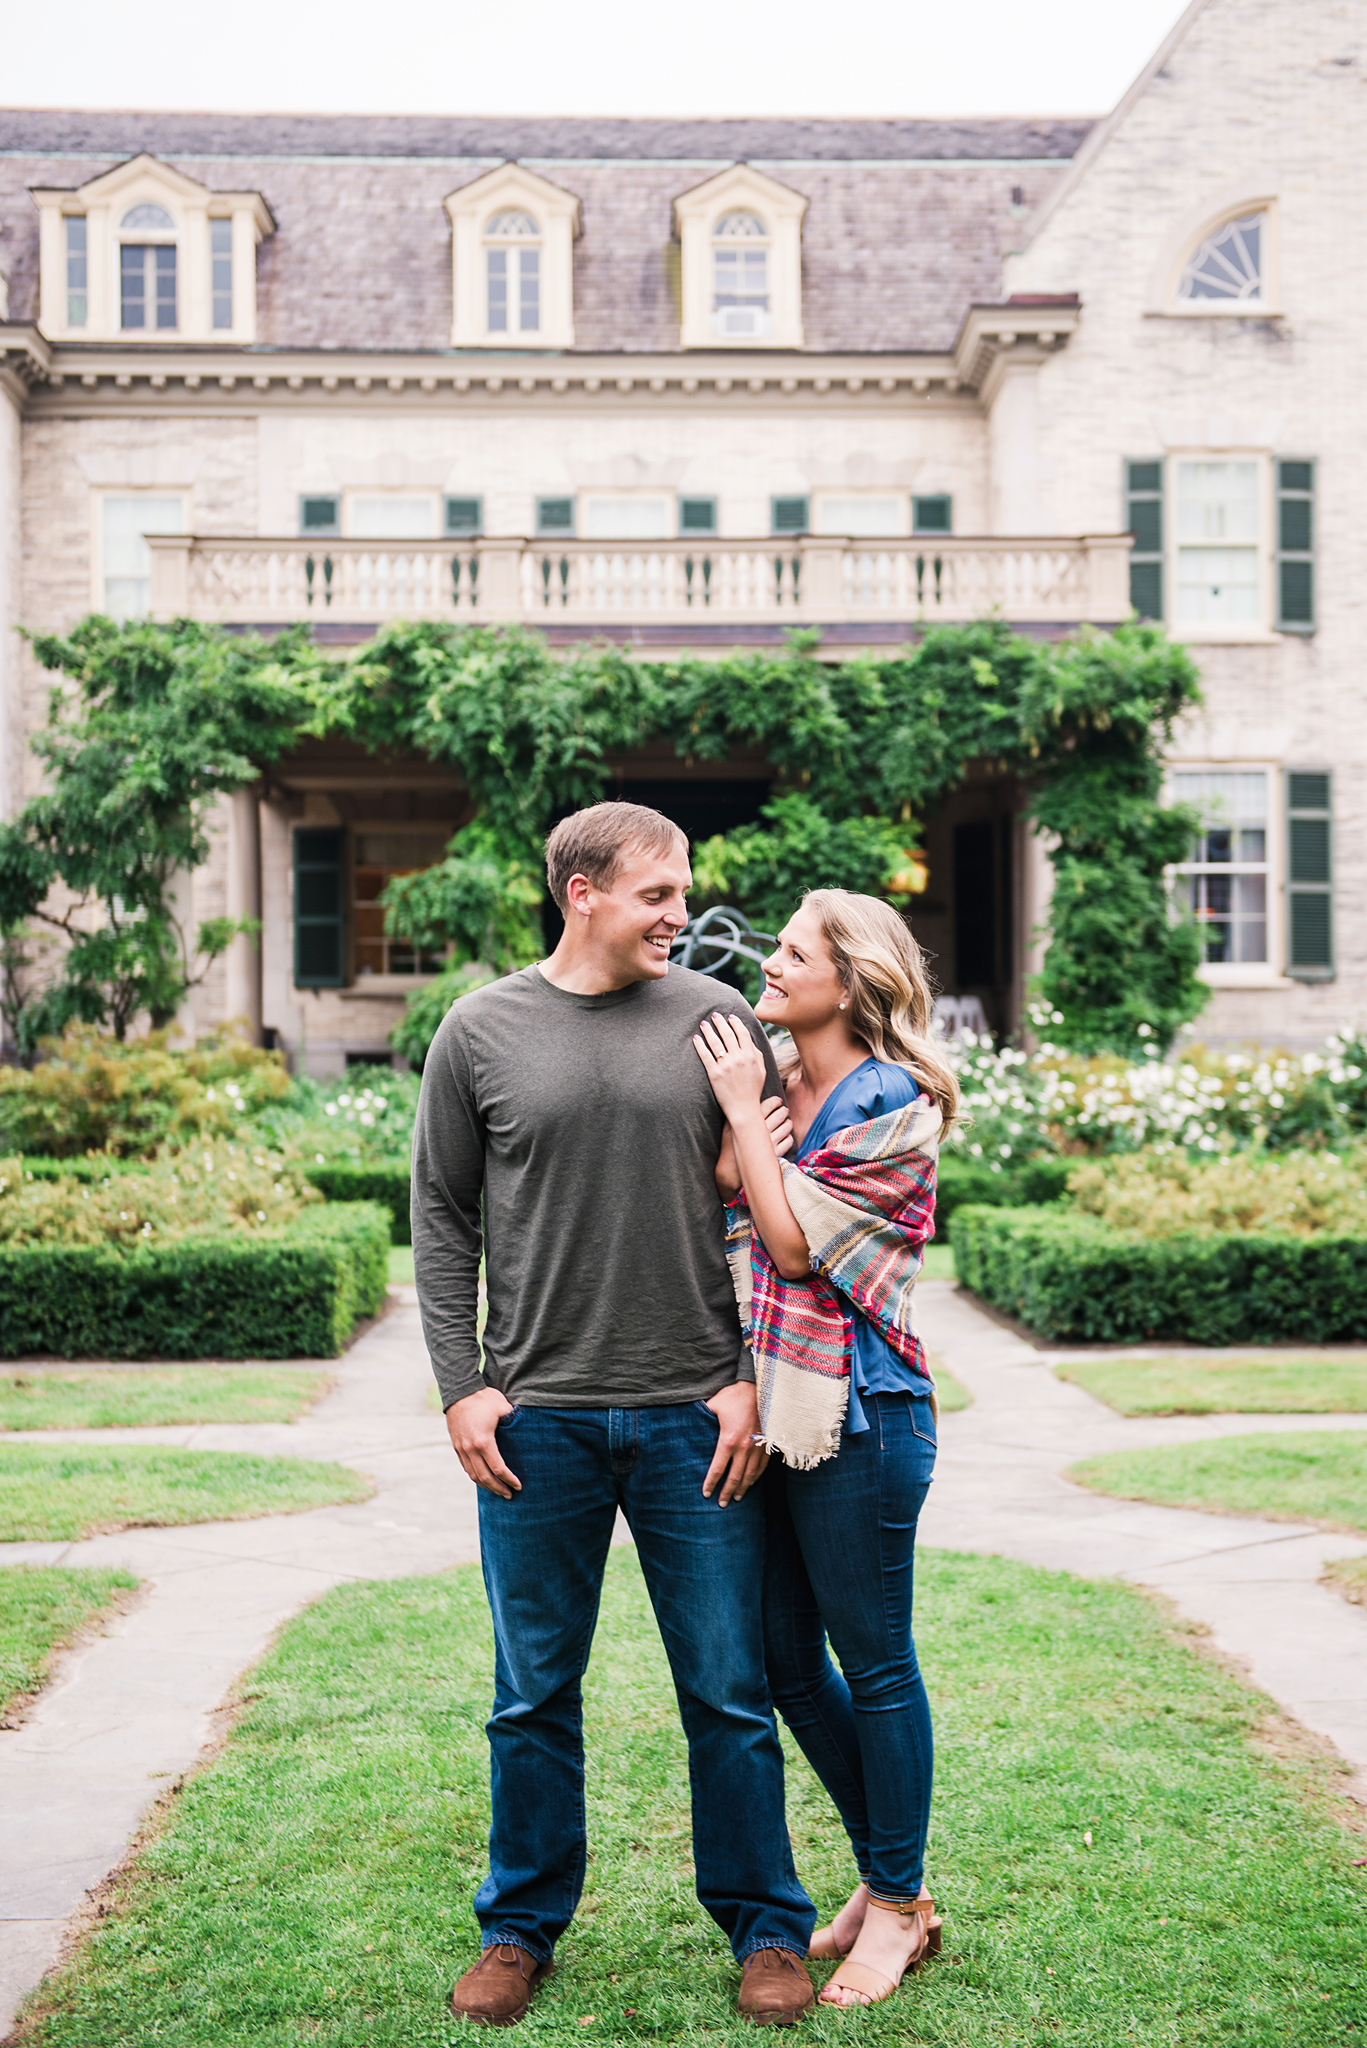 George_Eastman_House_Rochester_Yacht_Club_Rochester_Engagement_Session_JILL_STUDIO_Rochester_NY_Photographer_DSC_7999.jpg